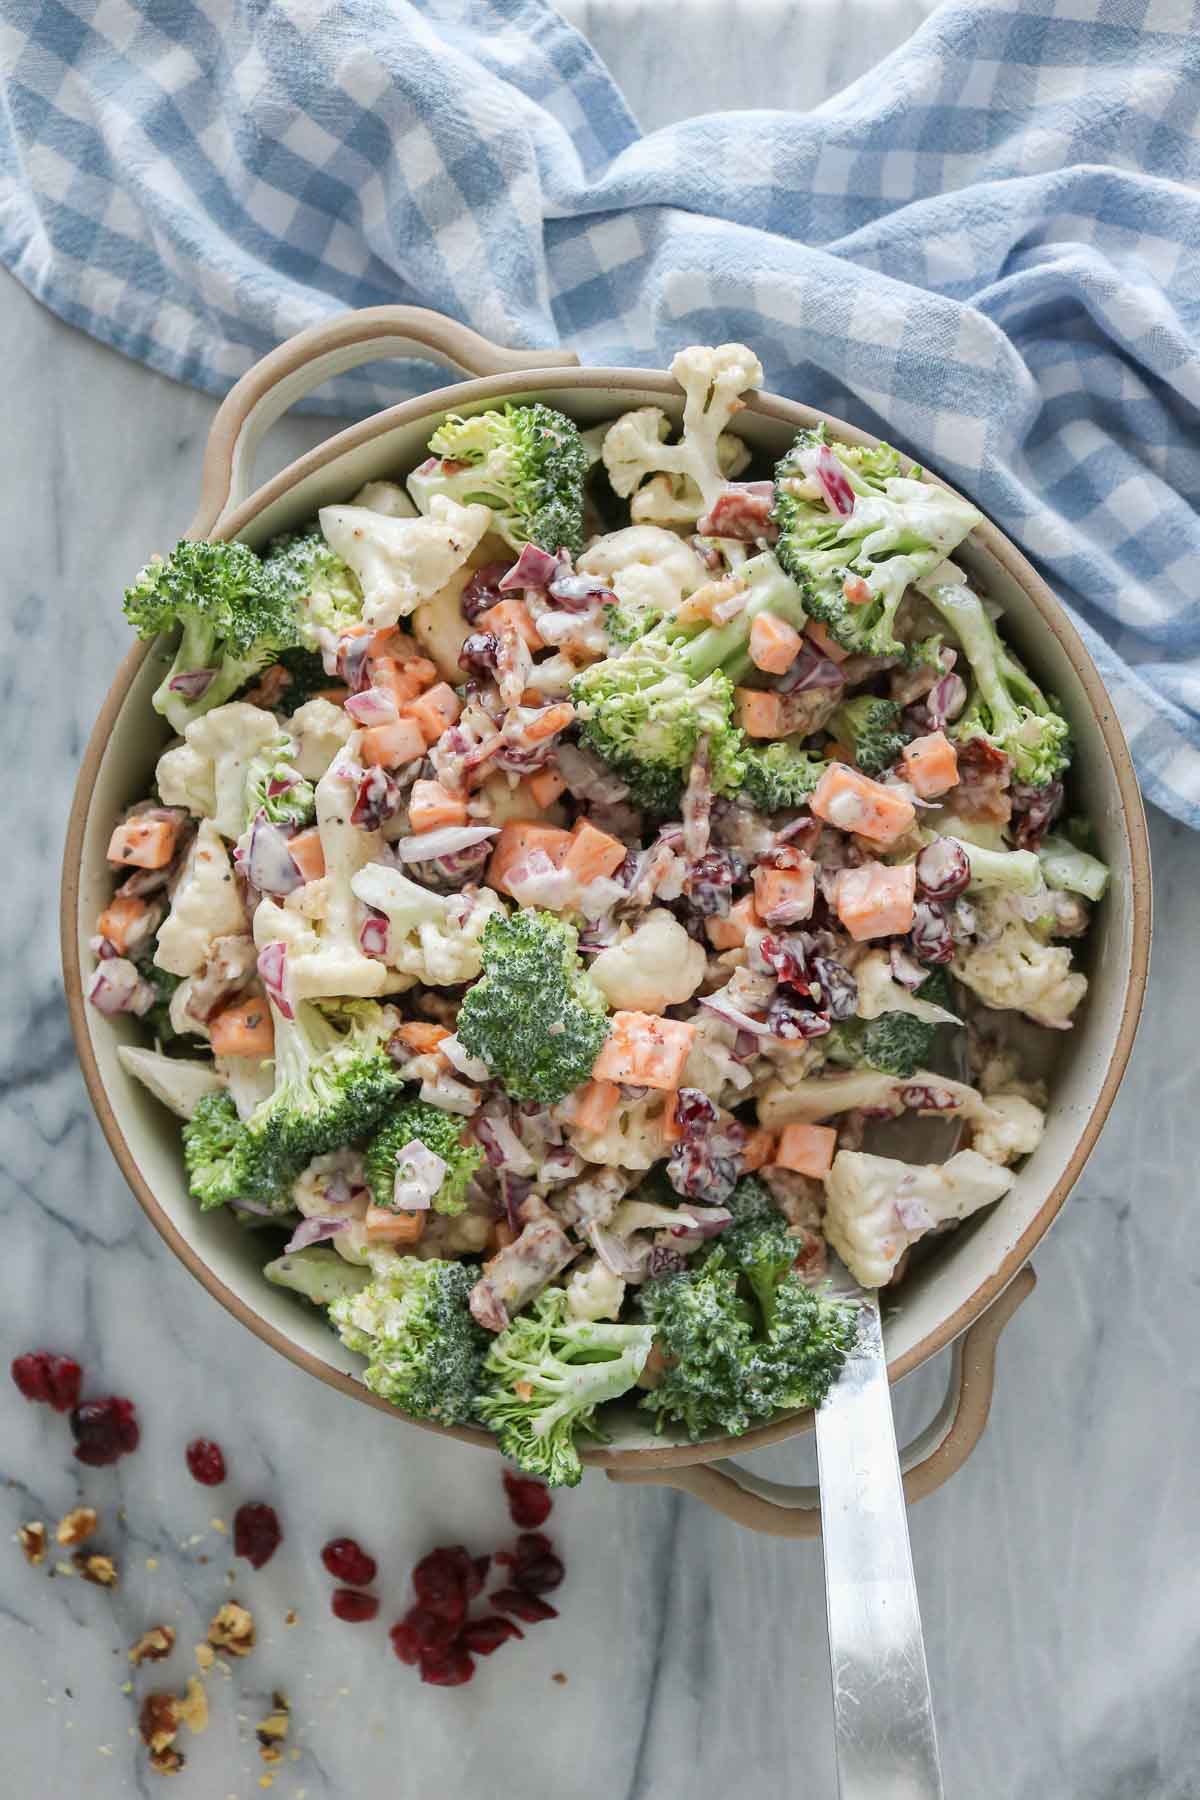 Cauliflower broccoli salad in a serving dish with a serving spoon.